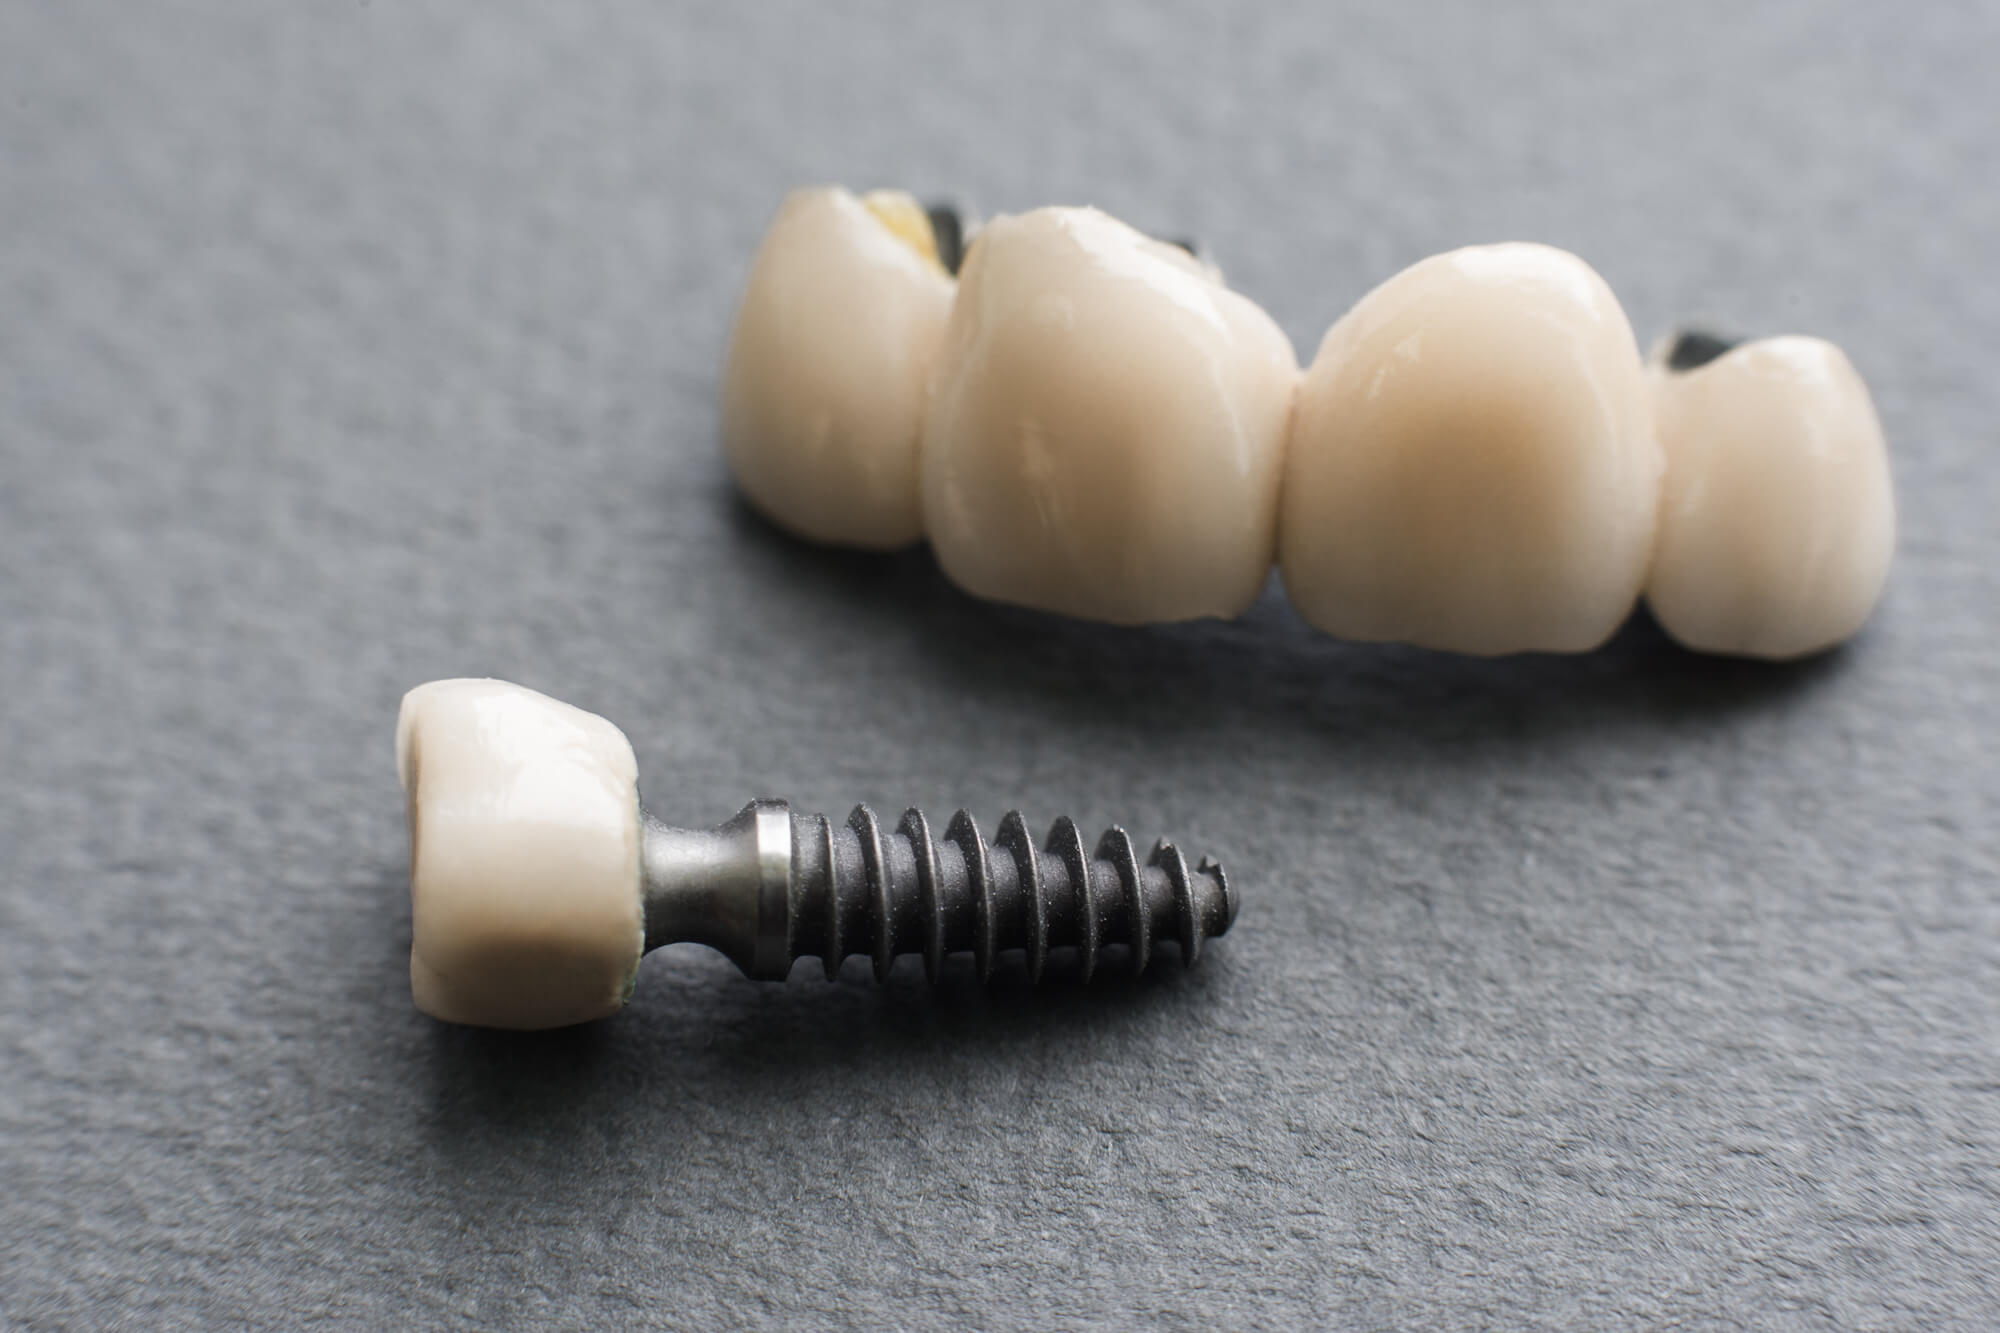 single implant separated from the rest of SF dental implants